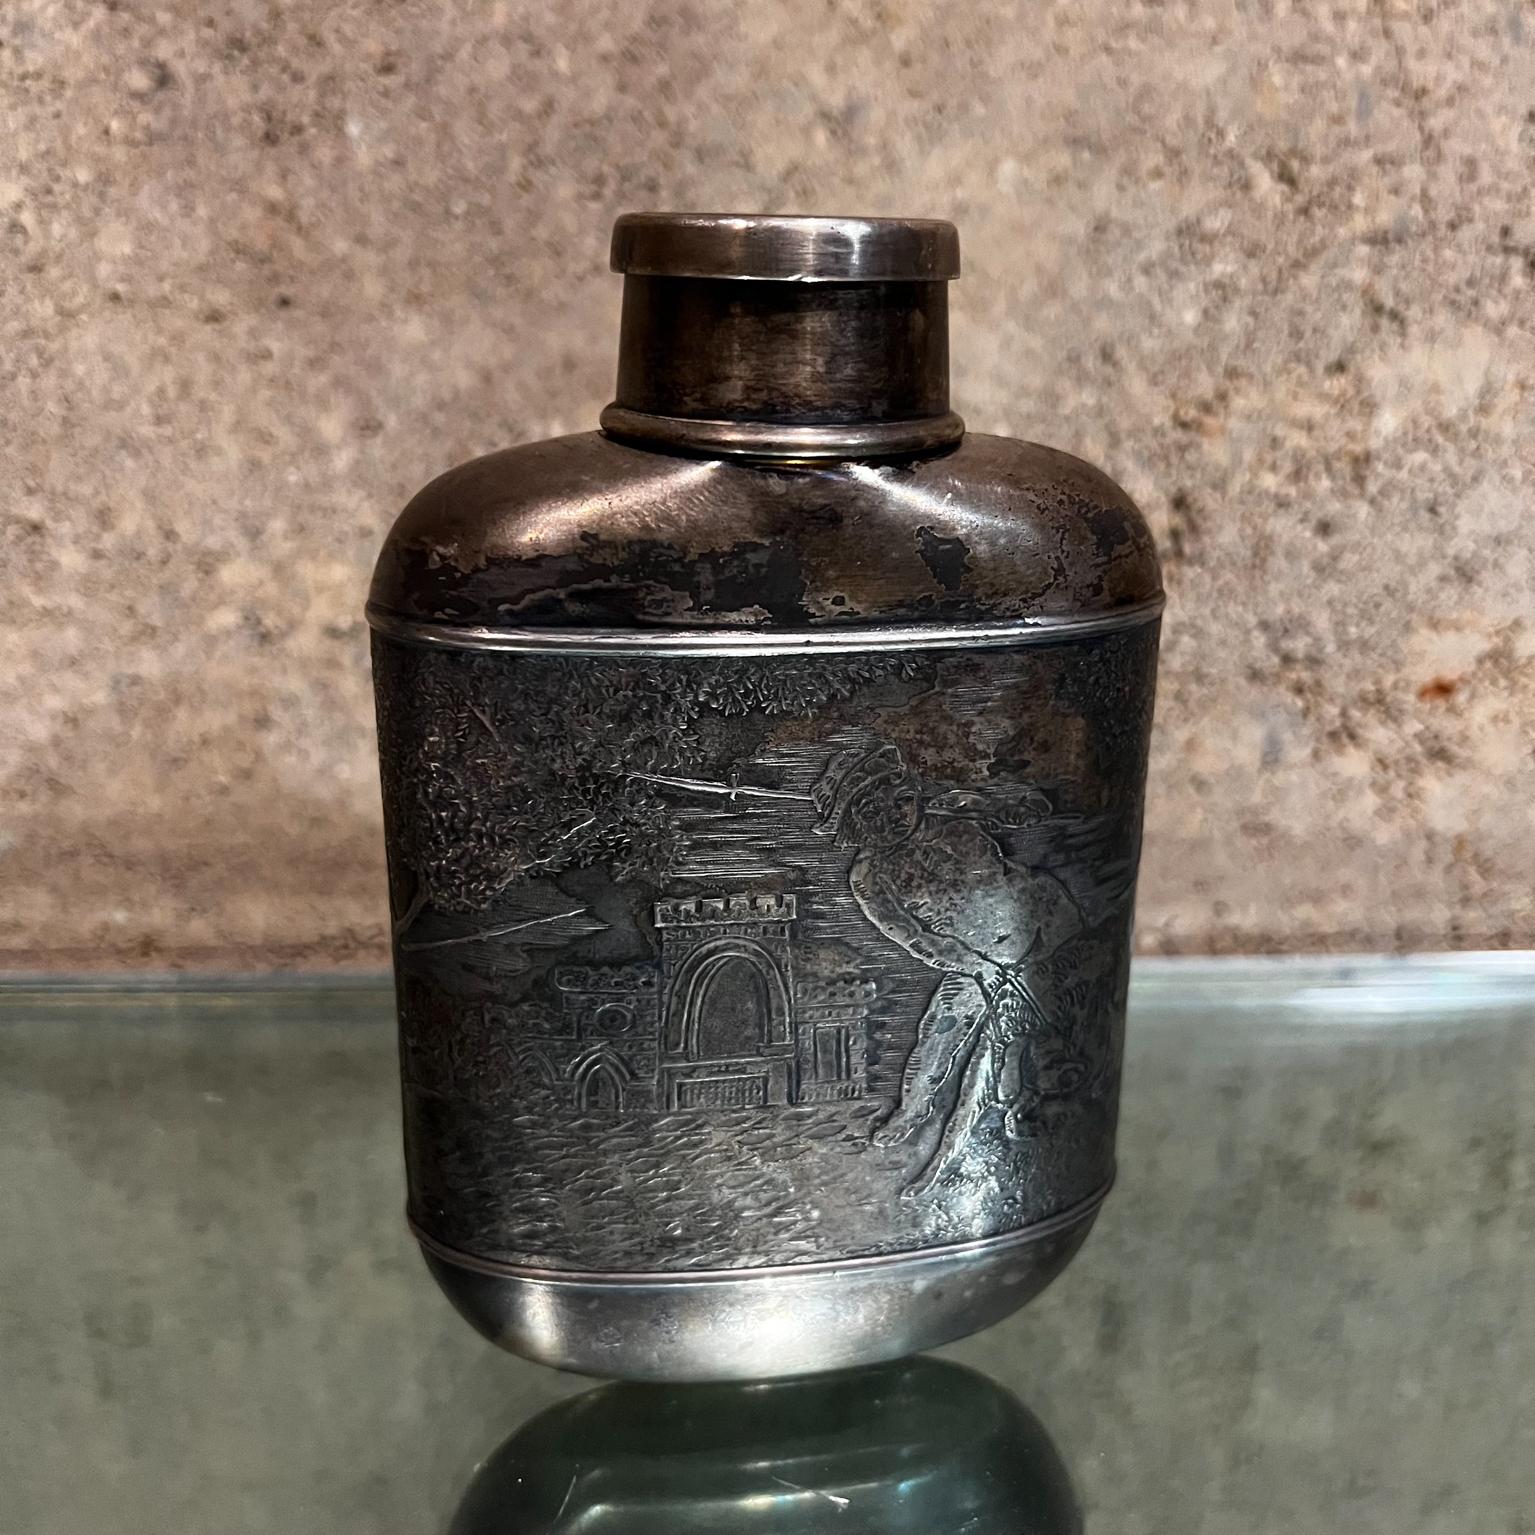 Old English silver liquor flask & cup figural relief hunting castle
Measures: 5.5 tall x 3.75 w x 1.5 d Cup 2.38 tall x 1.5 diameter
Drinking container screw cap serves as a cup.
Embossed graphics; kids on the field castles.
Preowned vintage